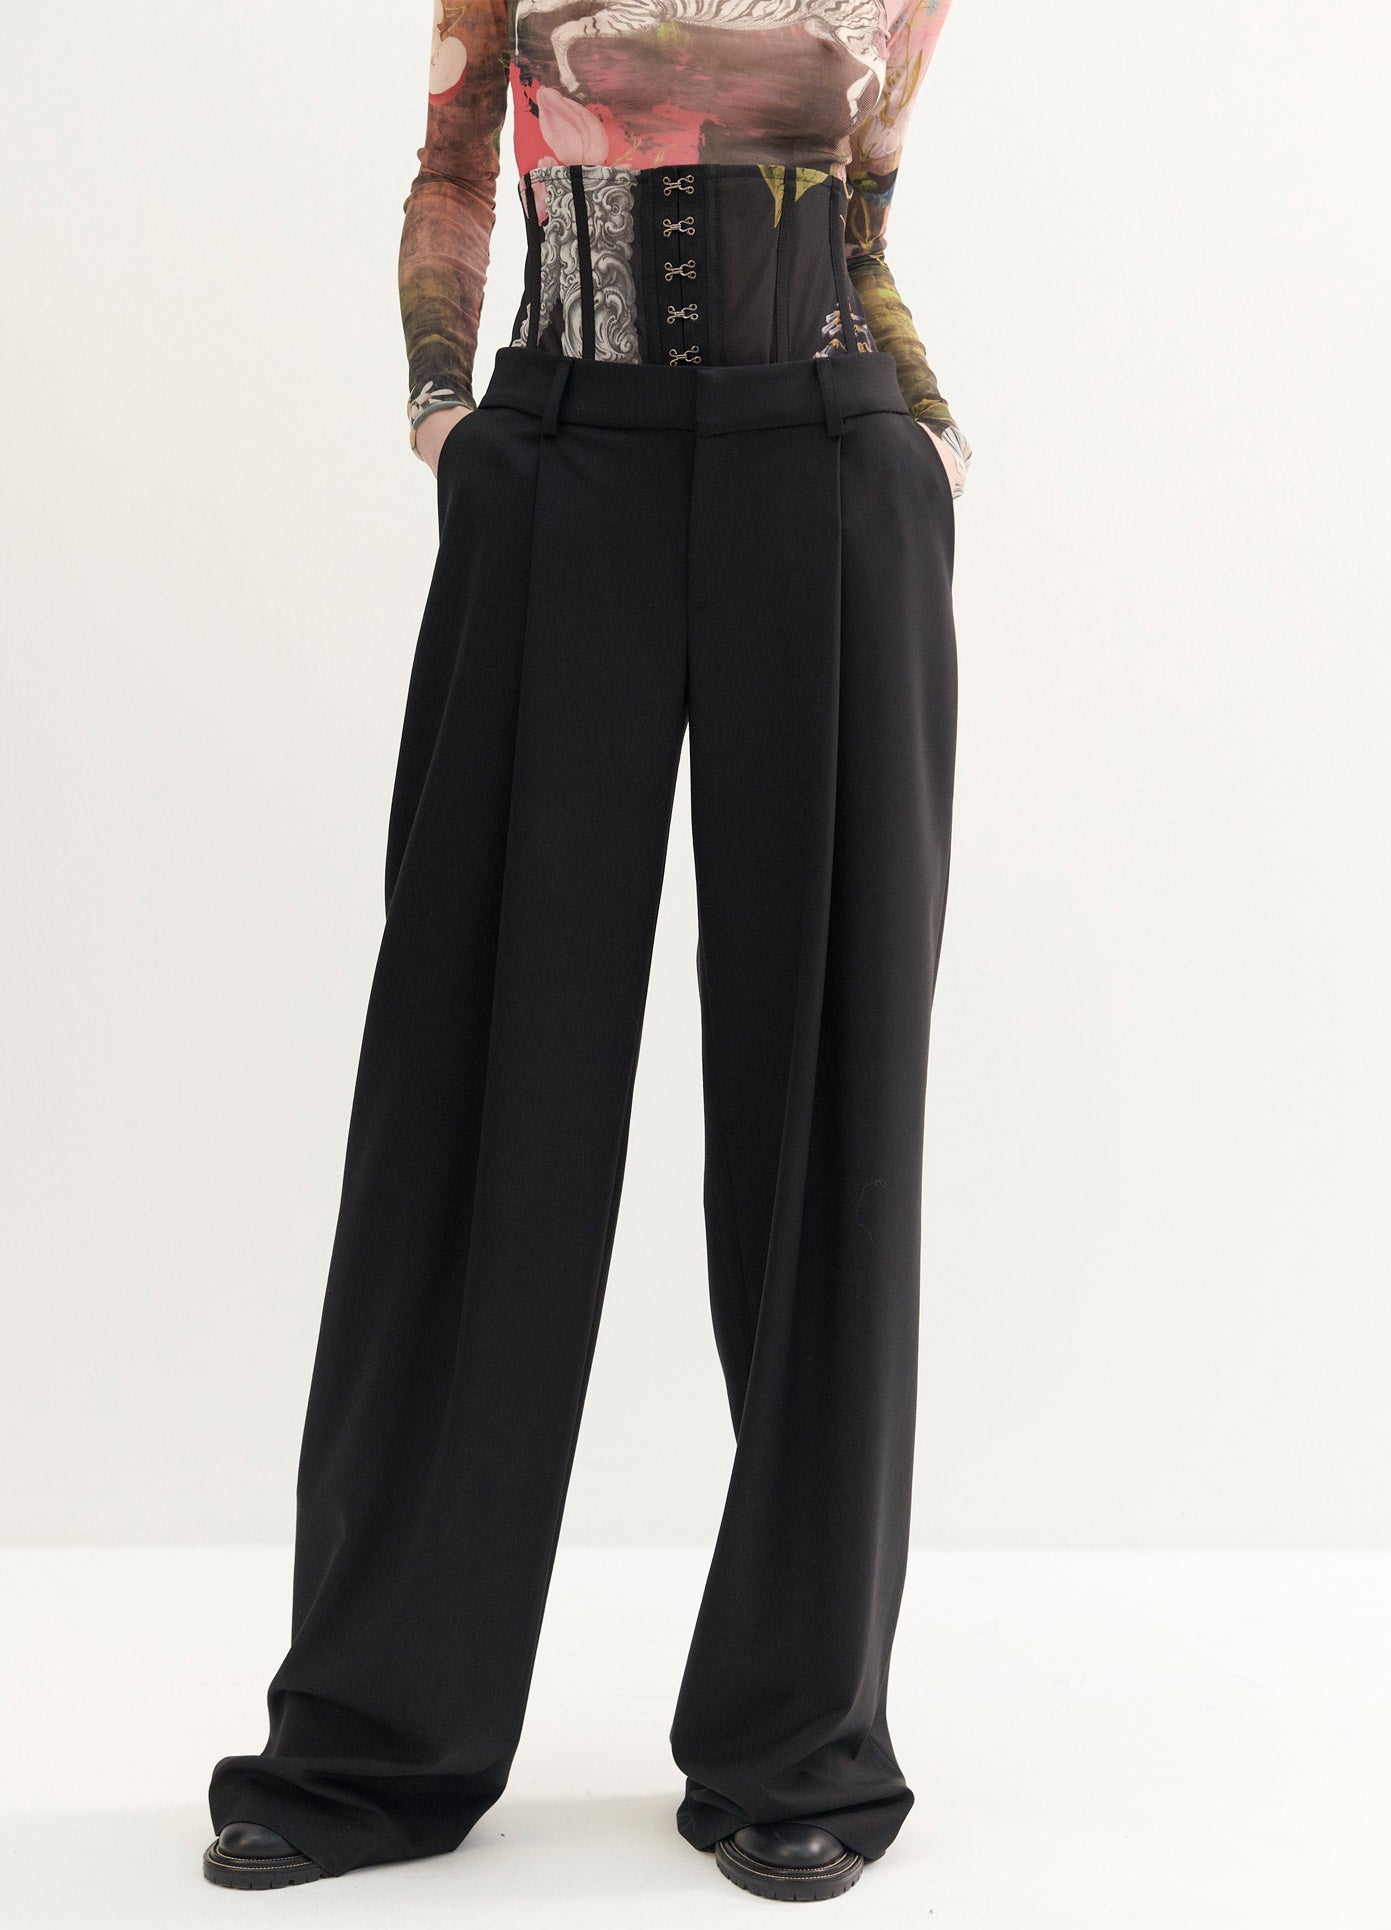 MONSE Print Bustier Trousers in Black on Model Front Detail View